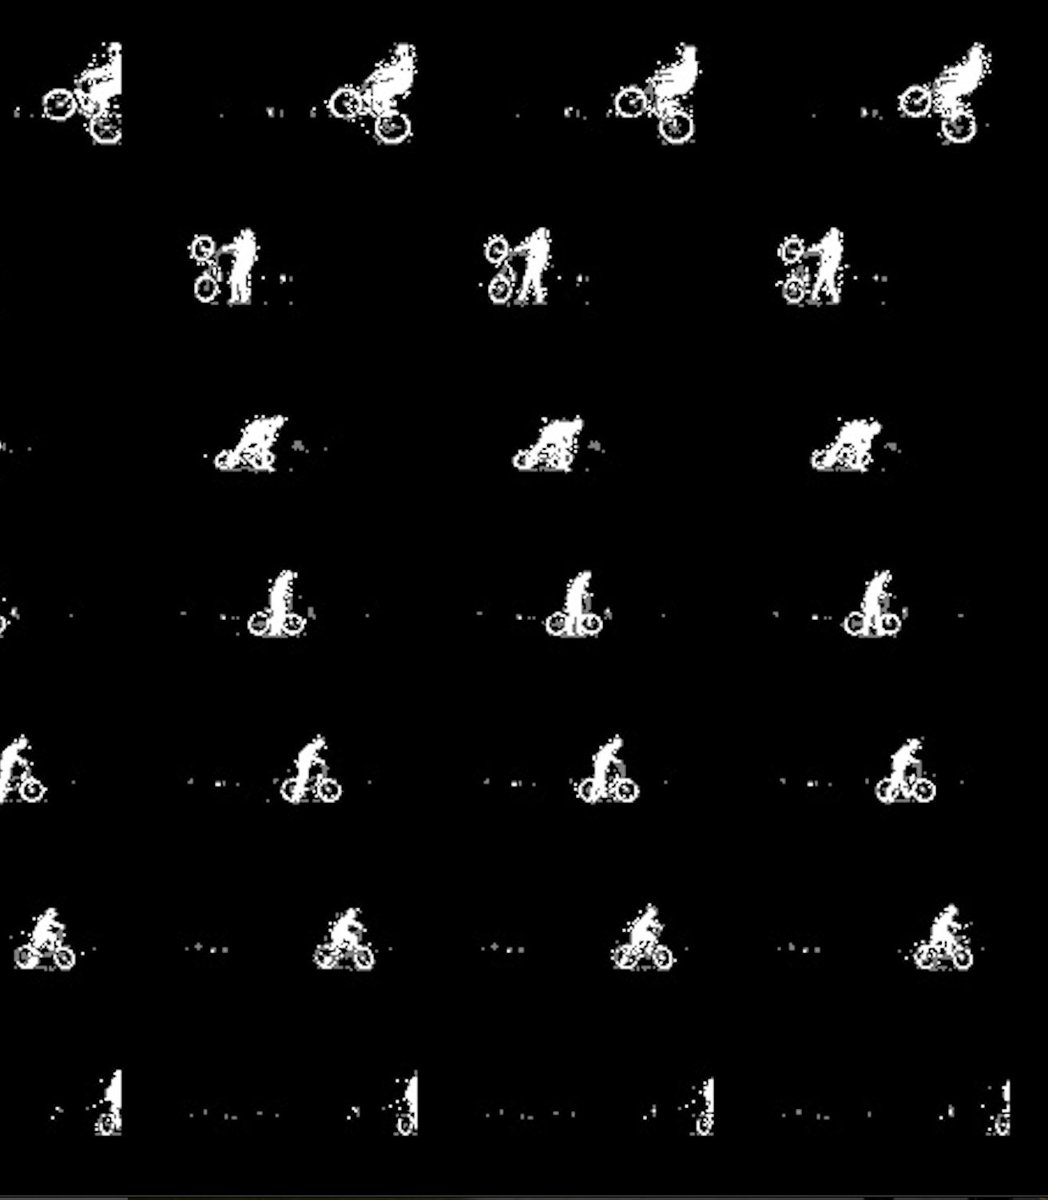 getting somewhere (subtracting bg so i can calculate amount of movement) #OpenCV #BMX